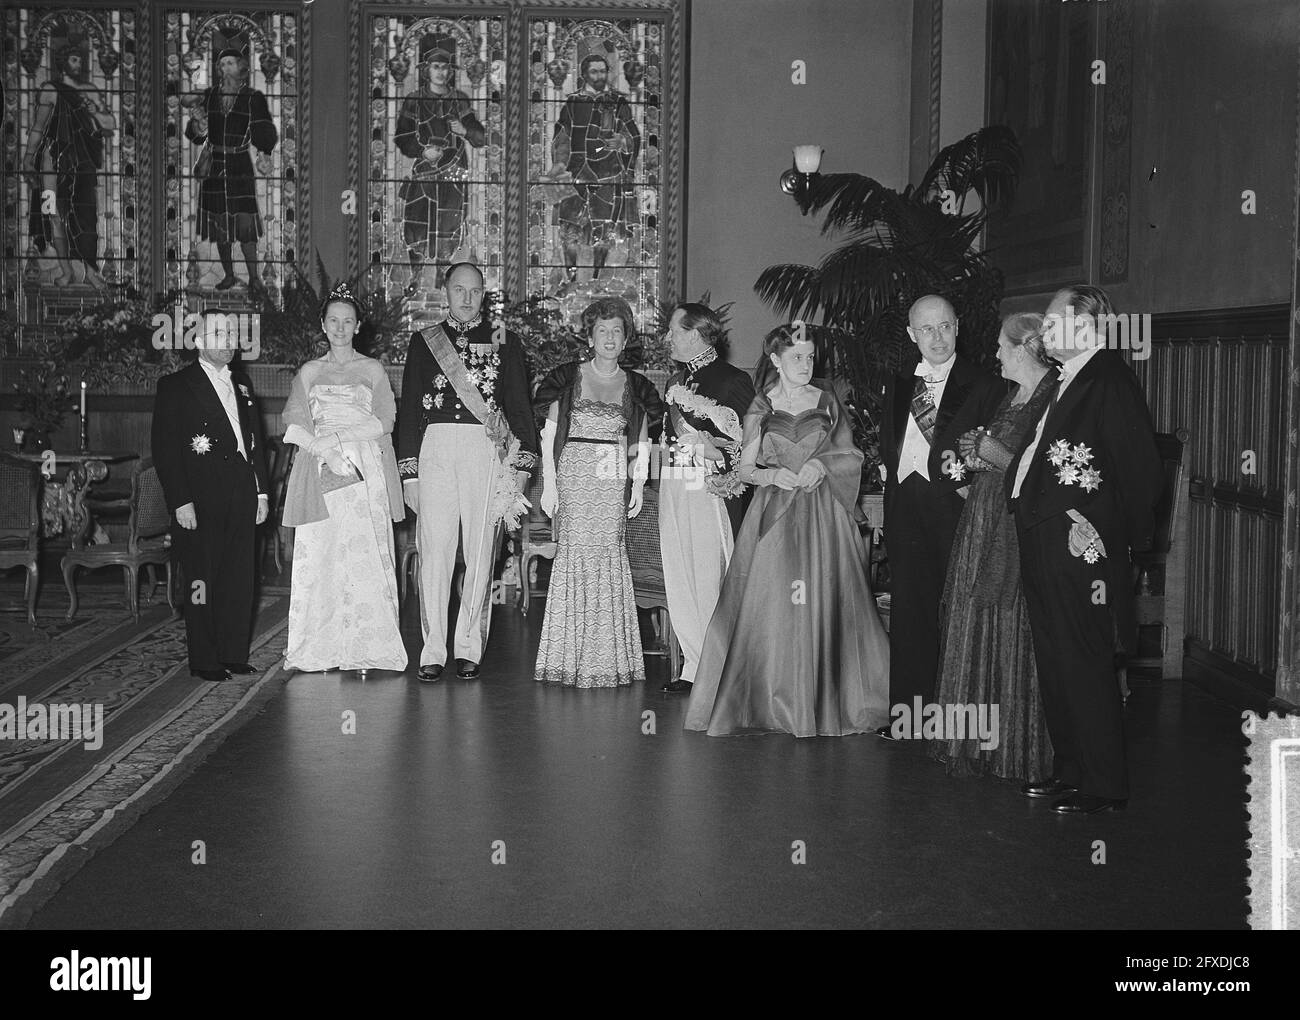 State visit of French president Coty to the Netherlands. Government dinner Rijksmuseum Amsterdam. The hosts with their spouses: from right to left: Prime Minister Willem Drees, Deputy Prime Minister Louis Beel, Foreign Minister Joseph Luns and Education Minister Jo Cals., July 23, 1954, dinners, royal house, presidents, The Netherlands, 20th century press agency photo, news to remember, documentary, historic photography 1945-1990, visual stories, human history of the Twentieth Century, capturing moments in time Stock Photo